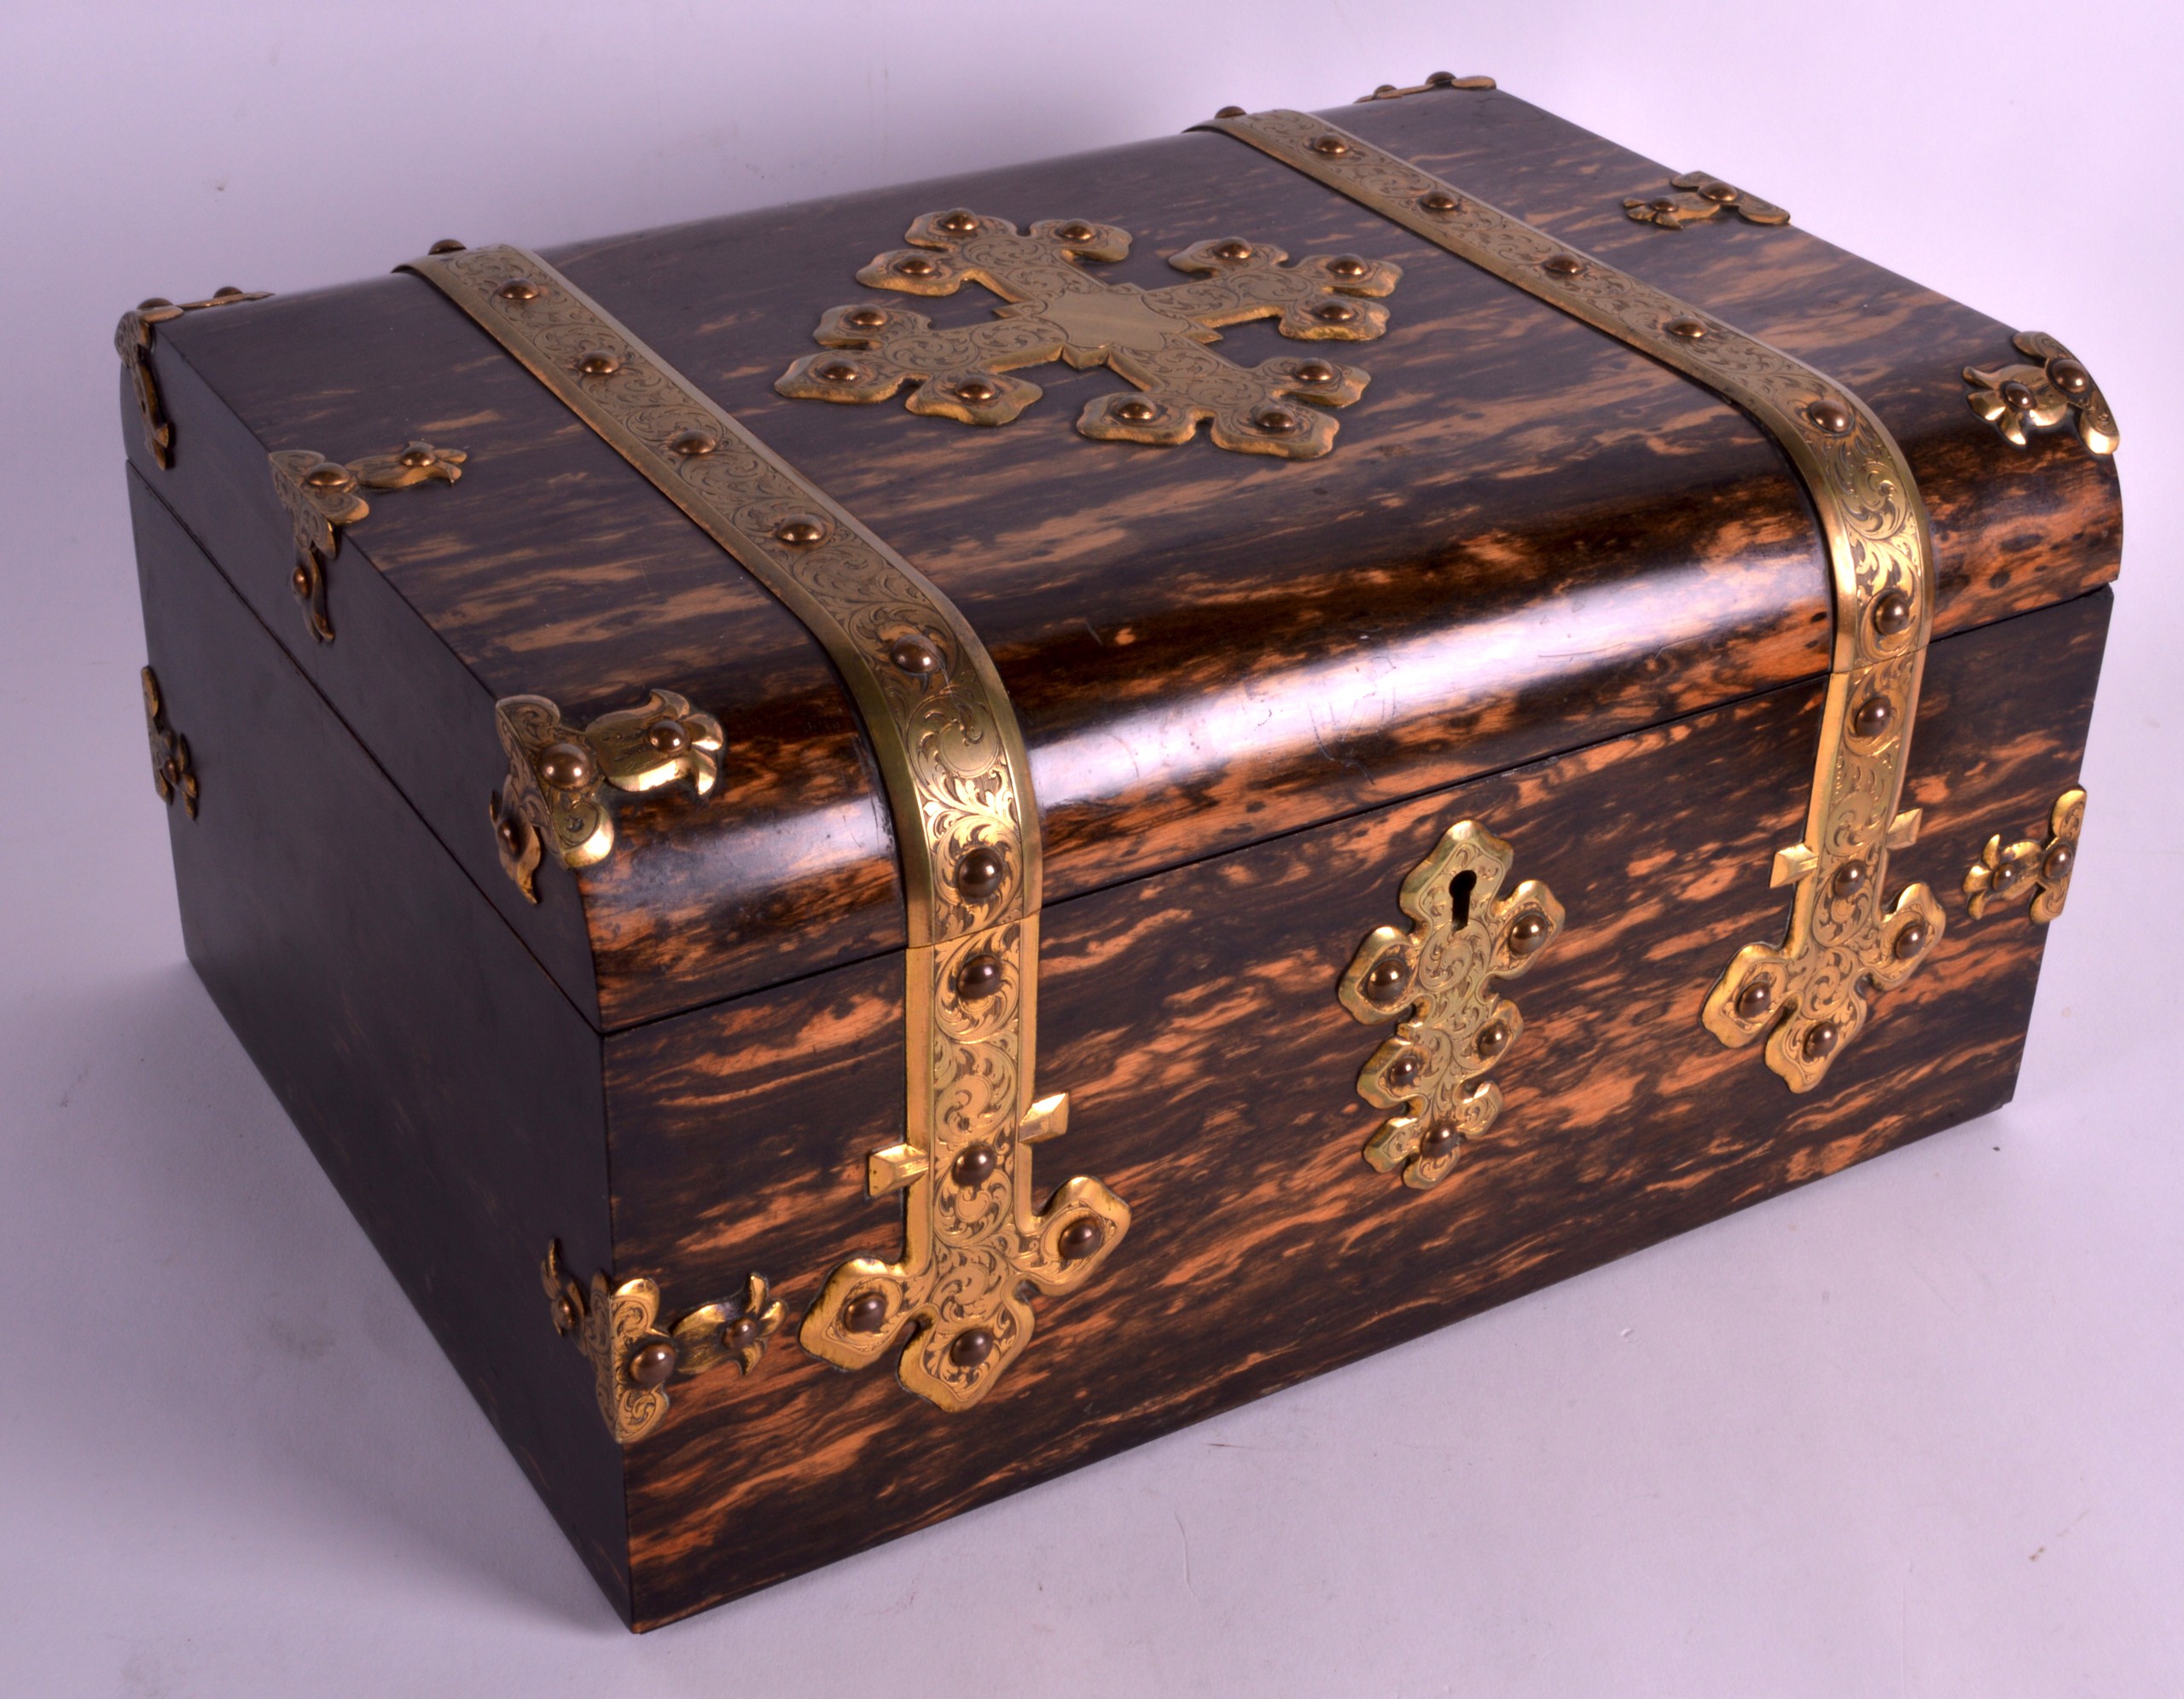 A FINE MID 19TH CENTURY ENGLISH COROMANDEL GAMING BOX overlaid in bronze with gothic straps, the top